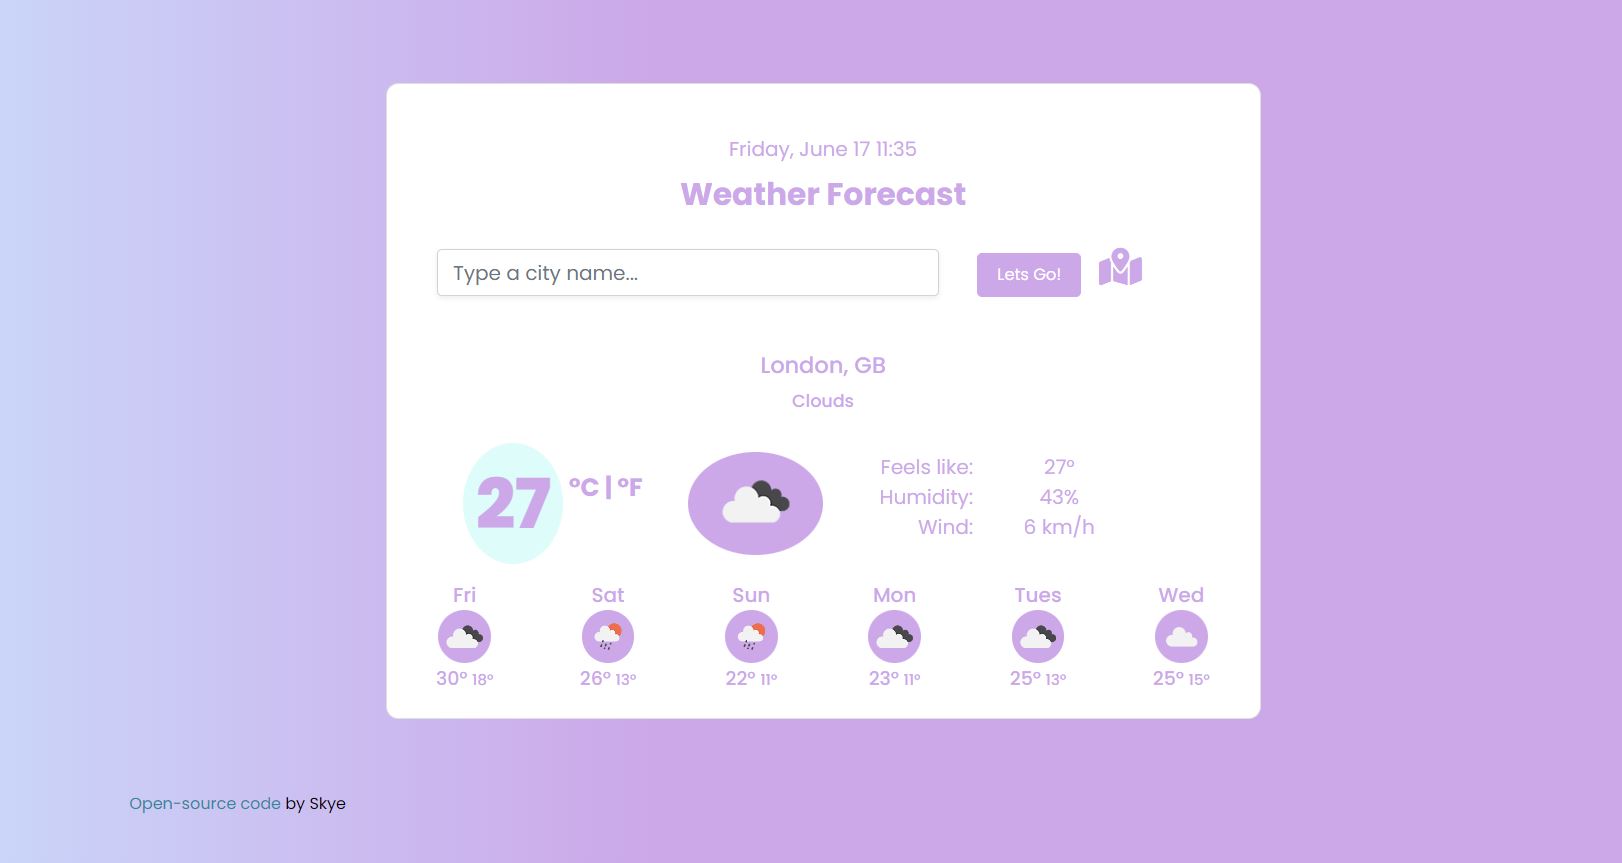 Weather Project